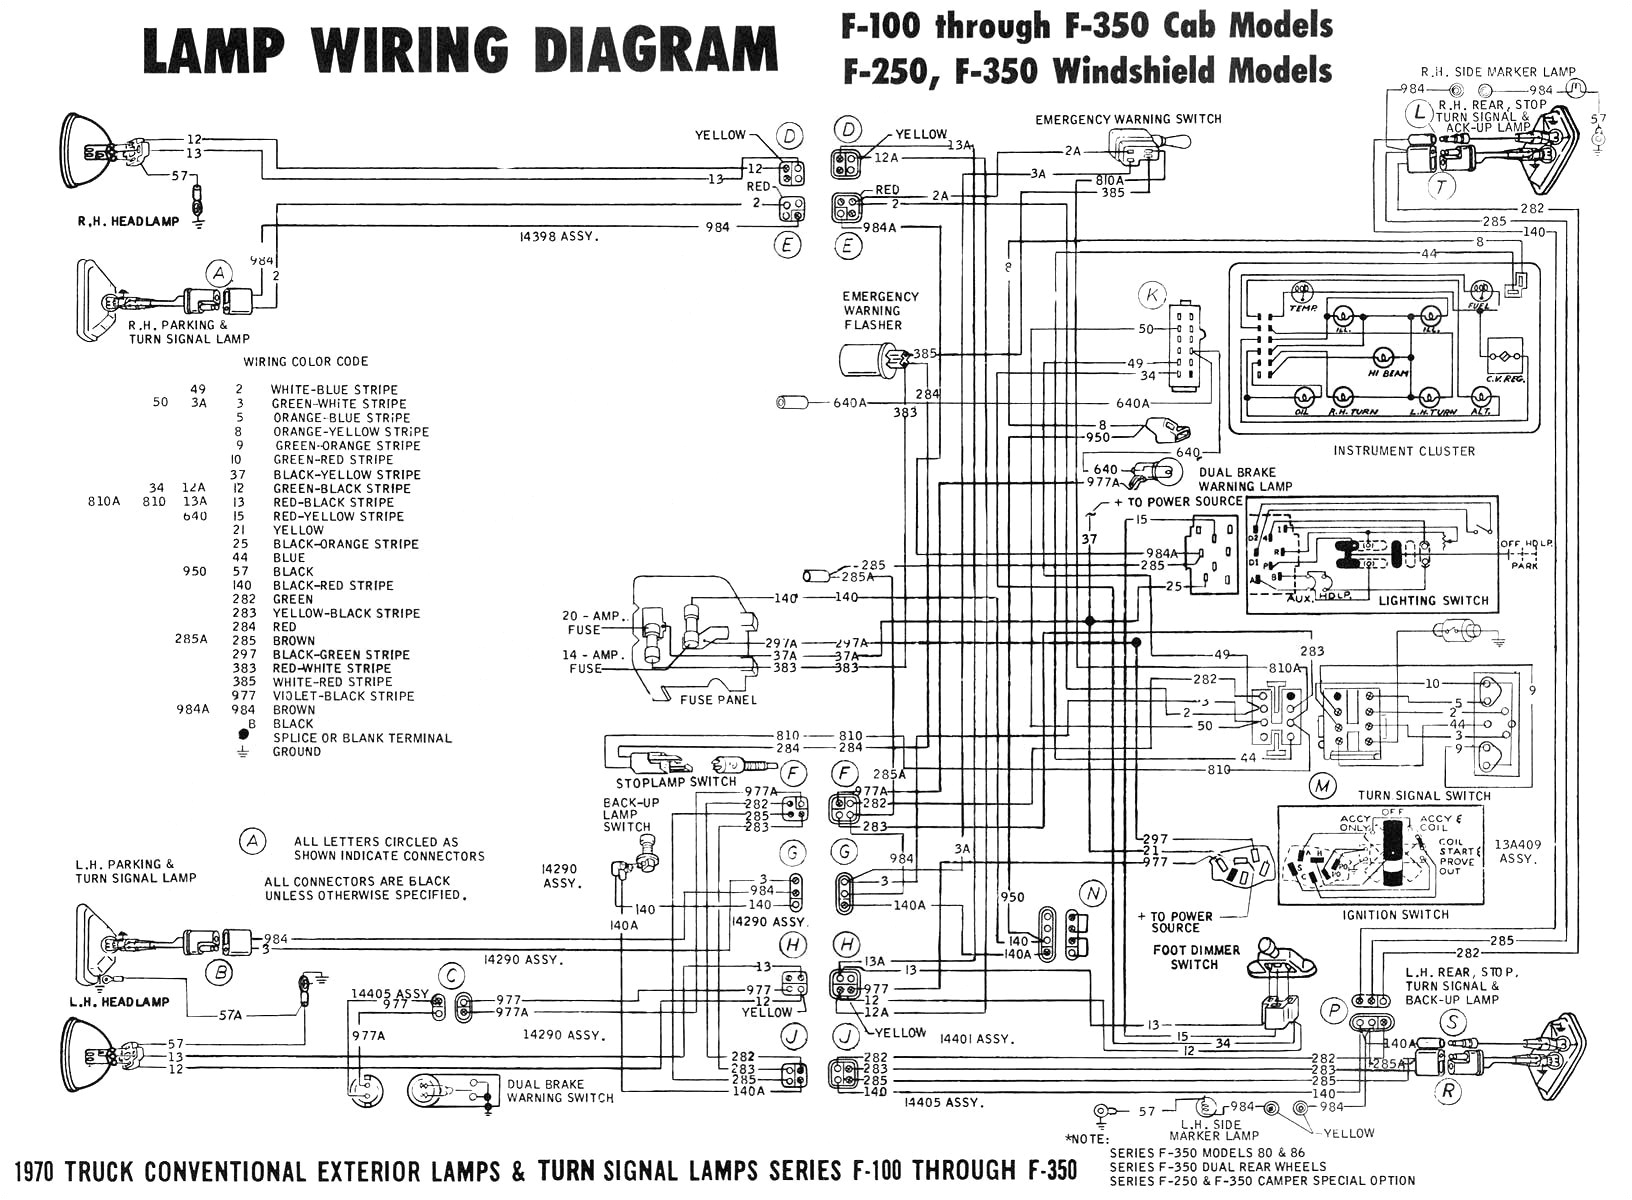 1967 mustang ignition switch wiring lzk gallery wiring diagrams audi a4 central locking pump wiring diagram